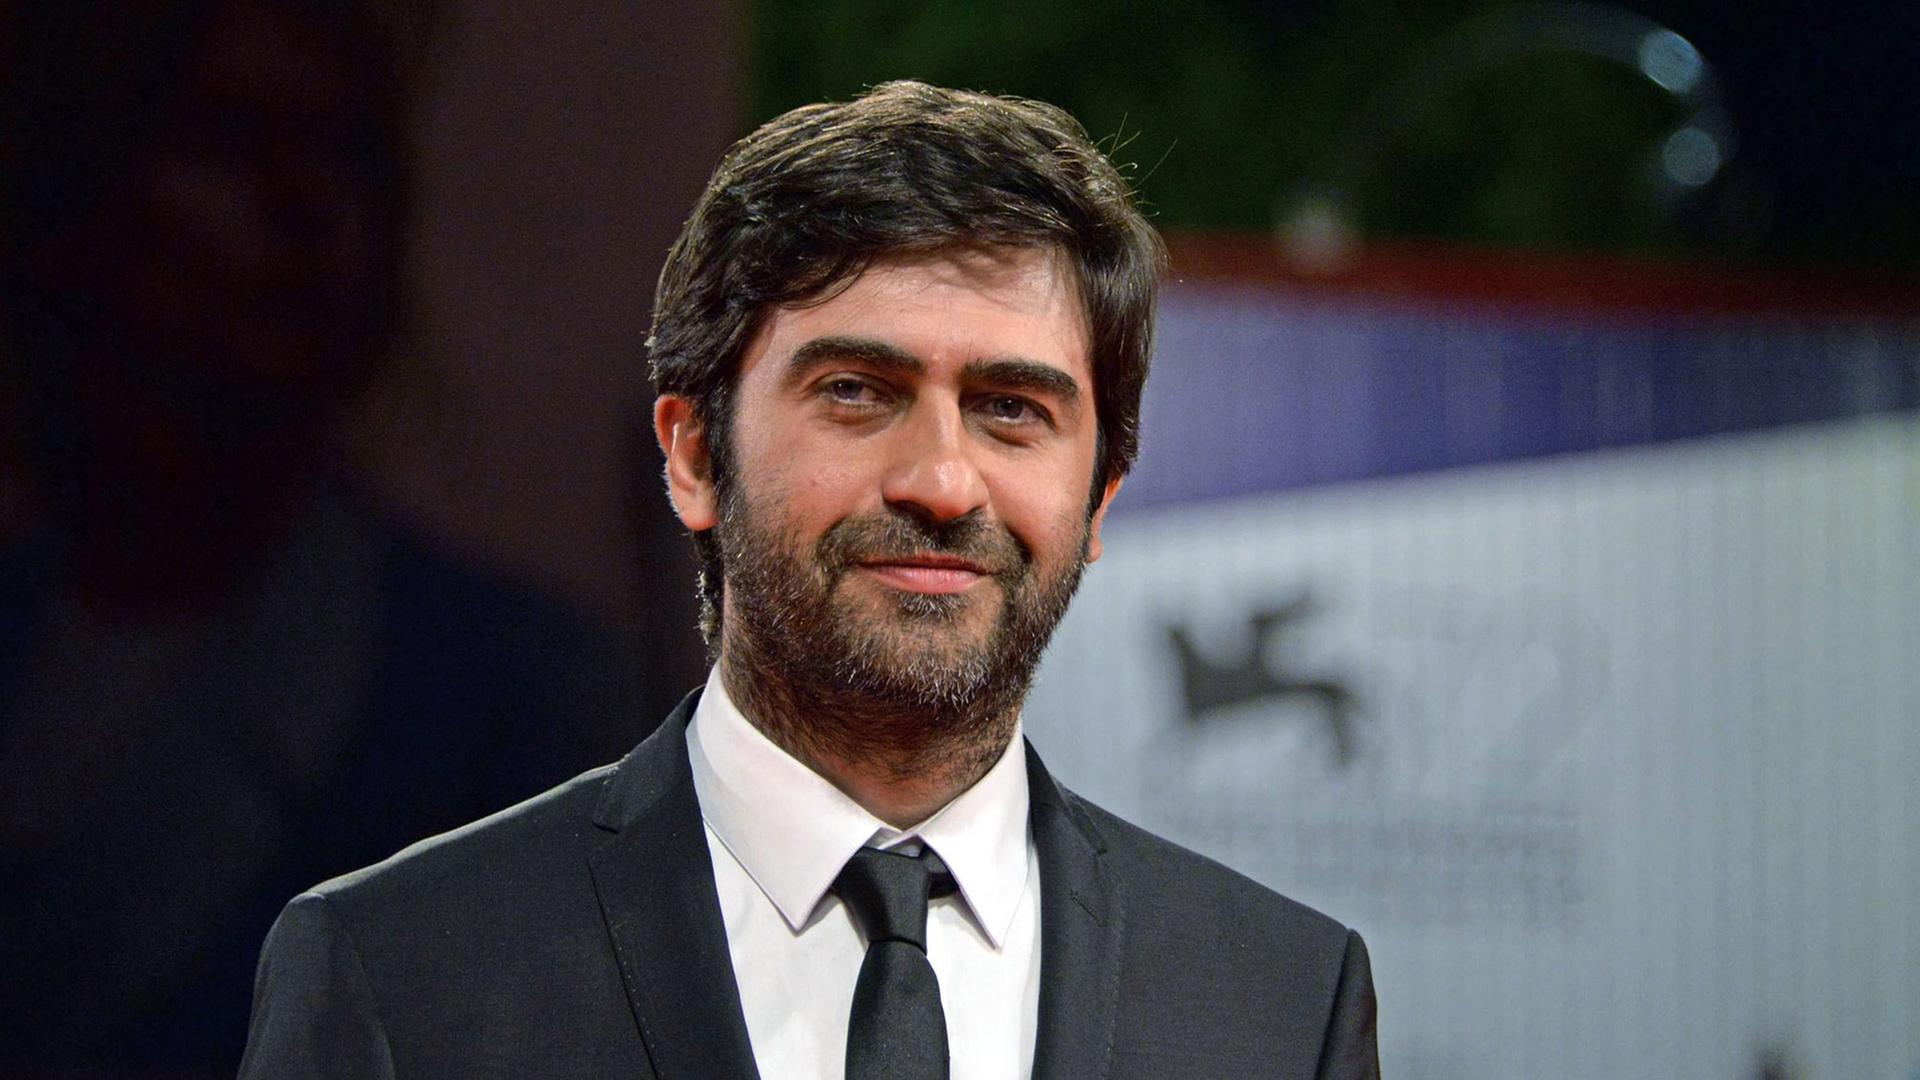 epa04920994 Turkish director Emin Alper arrives for the premiere of 'Abluka (Frenzy)' at the 72nd annual Venice International Film Festival, in Venice, Italy, 08 September 2015. The movie is presented in the official competition 'Venezia 72' at the festival running from 02 September to 12 September. EPA/ANDREA MEROLA